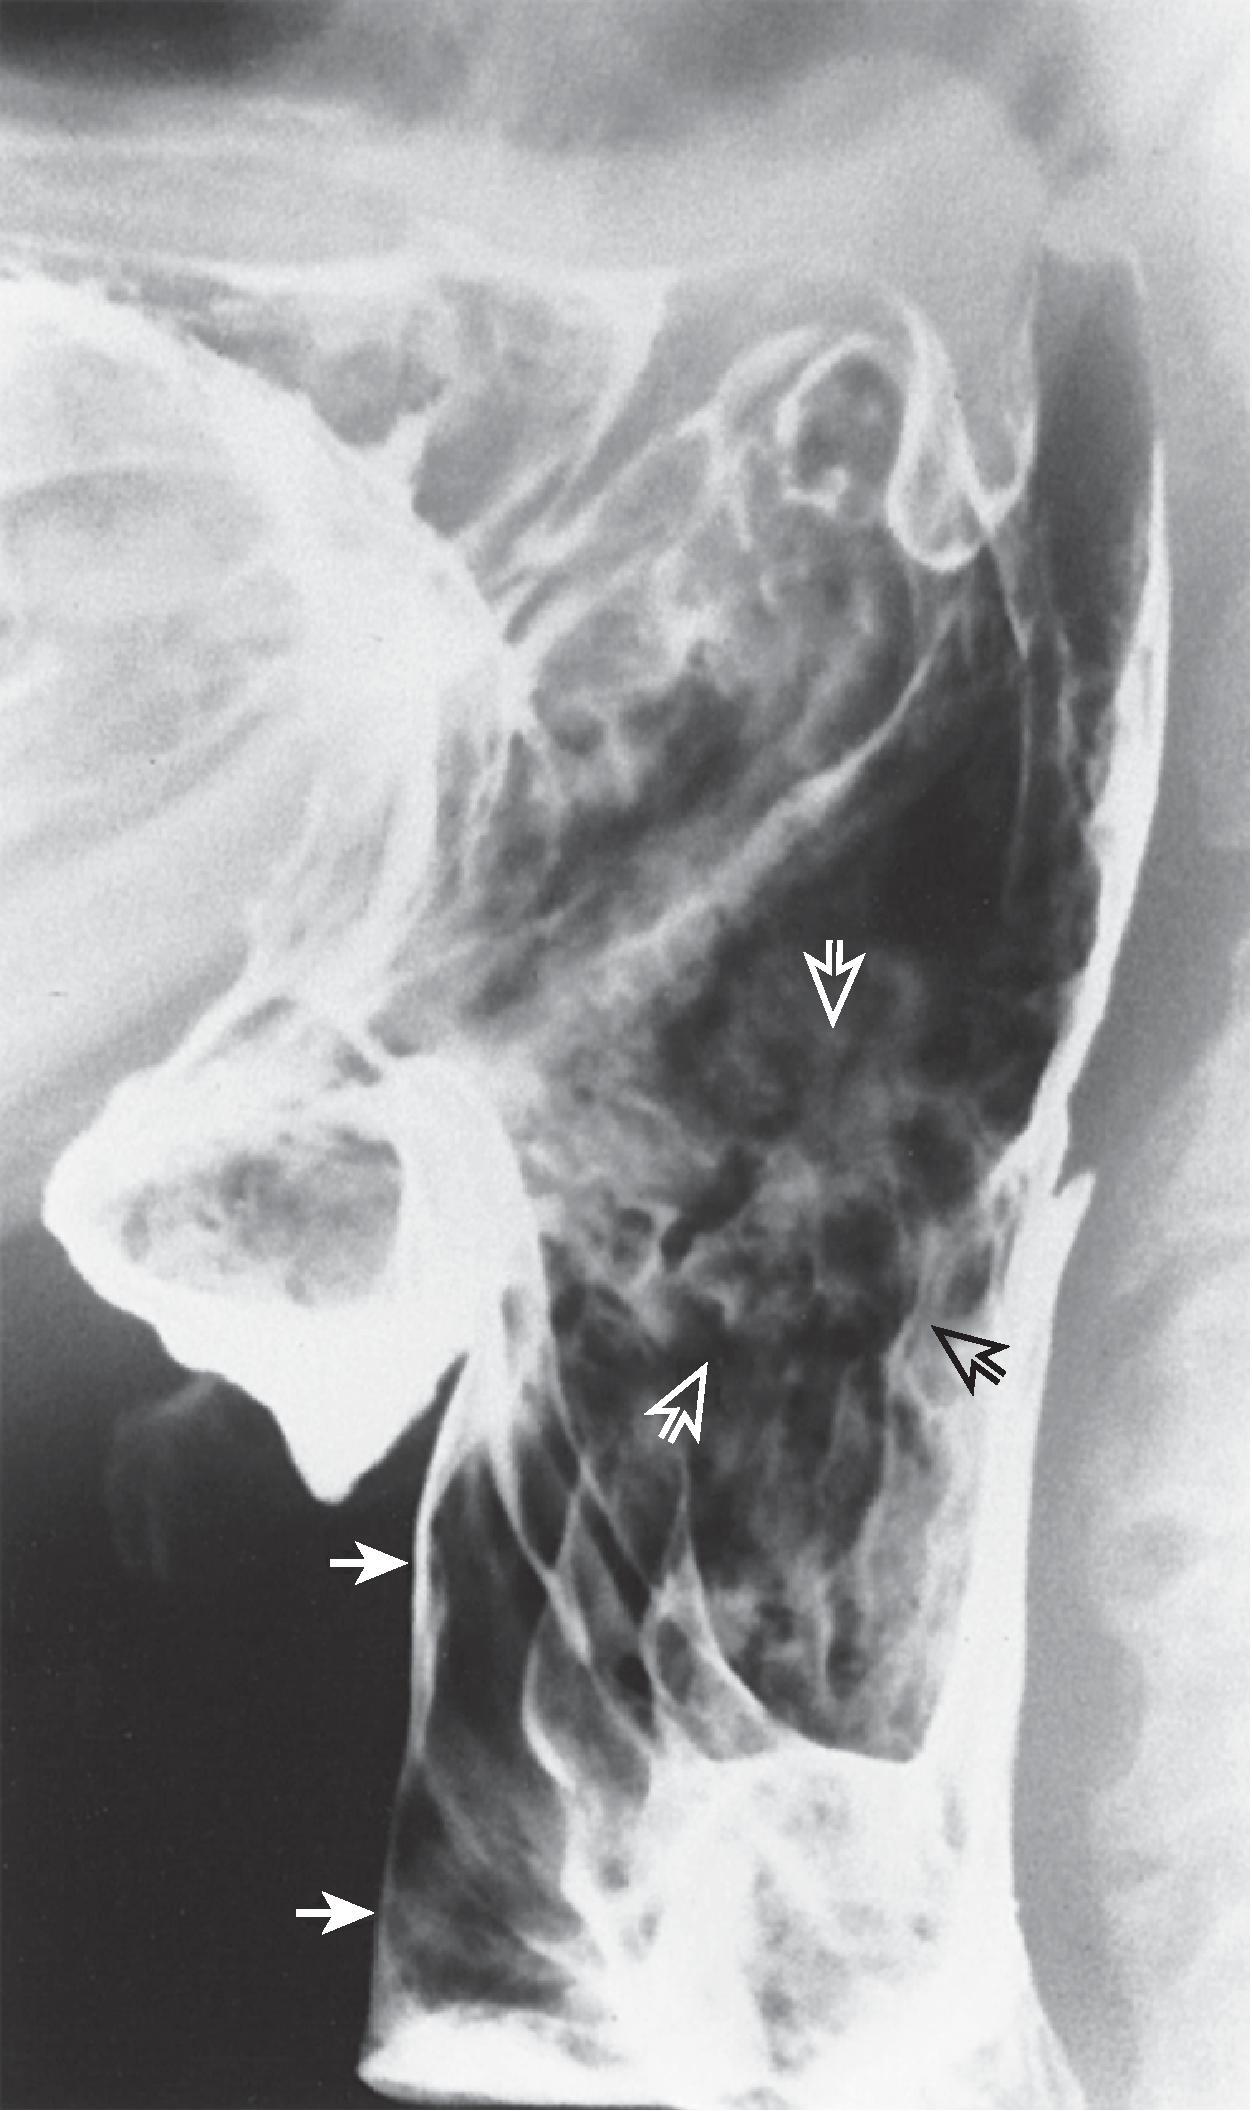 Fig. 5.9, Candida pharyngitis. Lateral view of the pharynx shows well-circumscribed plaques ( open arrows ) at the level of the epiglottis. Note laryngeal vestibule penetration ( solid arrows ) resulting from abnormal pharyngeal motility associated with this inflammatory pharyngitis. (From Rubesin SE. Pharynx. In: Laufer I, Levine MS, eds. Double Contrast Gastrointestinal Radiology , 2nd ed. Philadelphia: WB Saunders; 1992.)